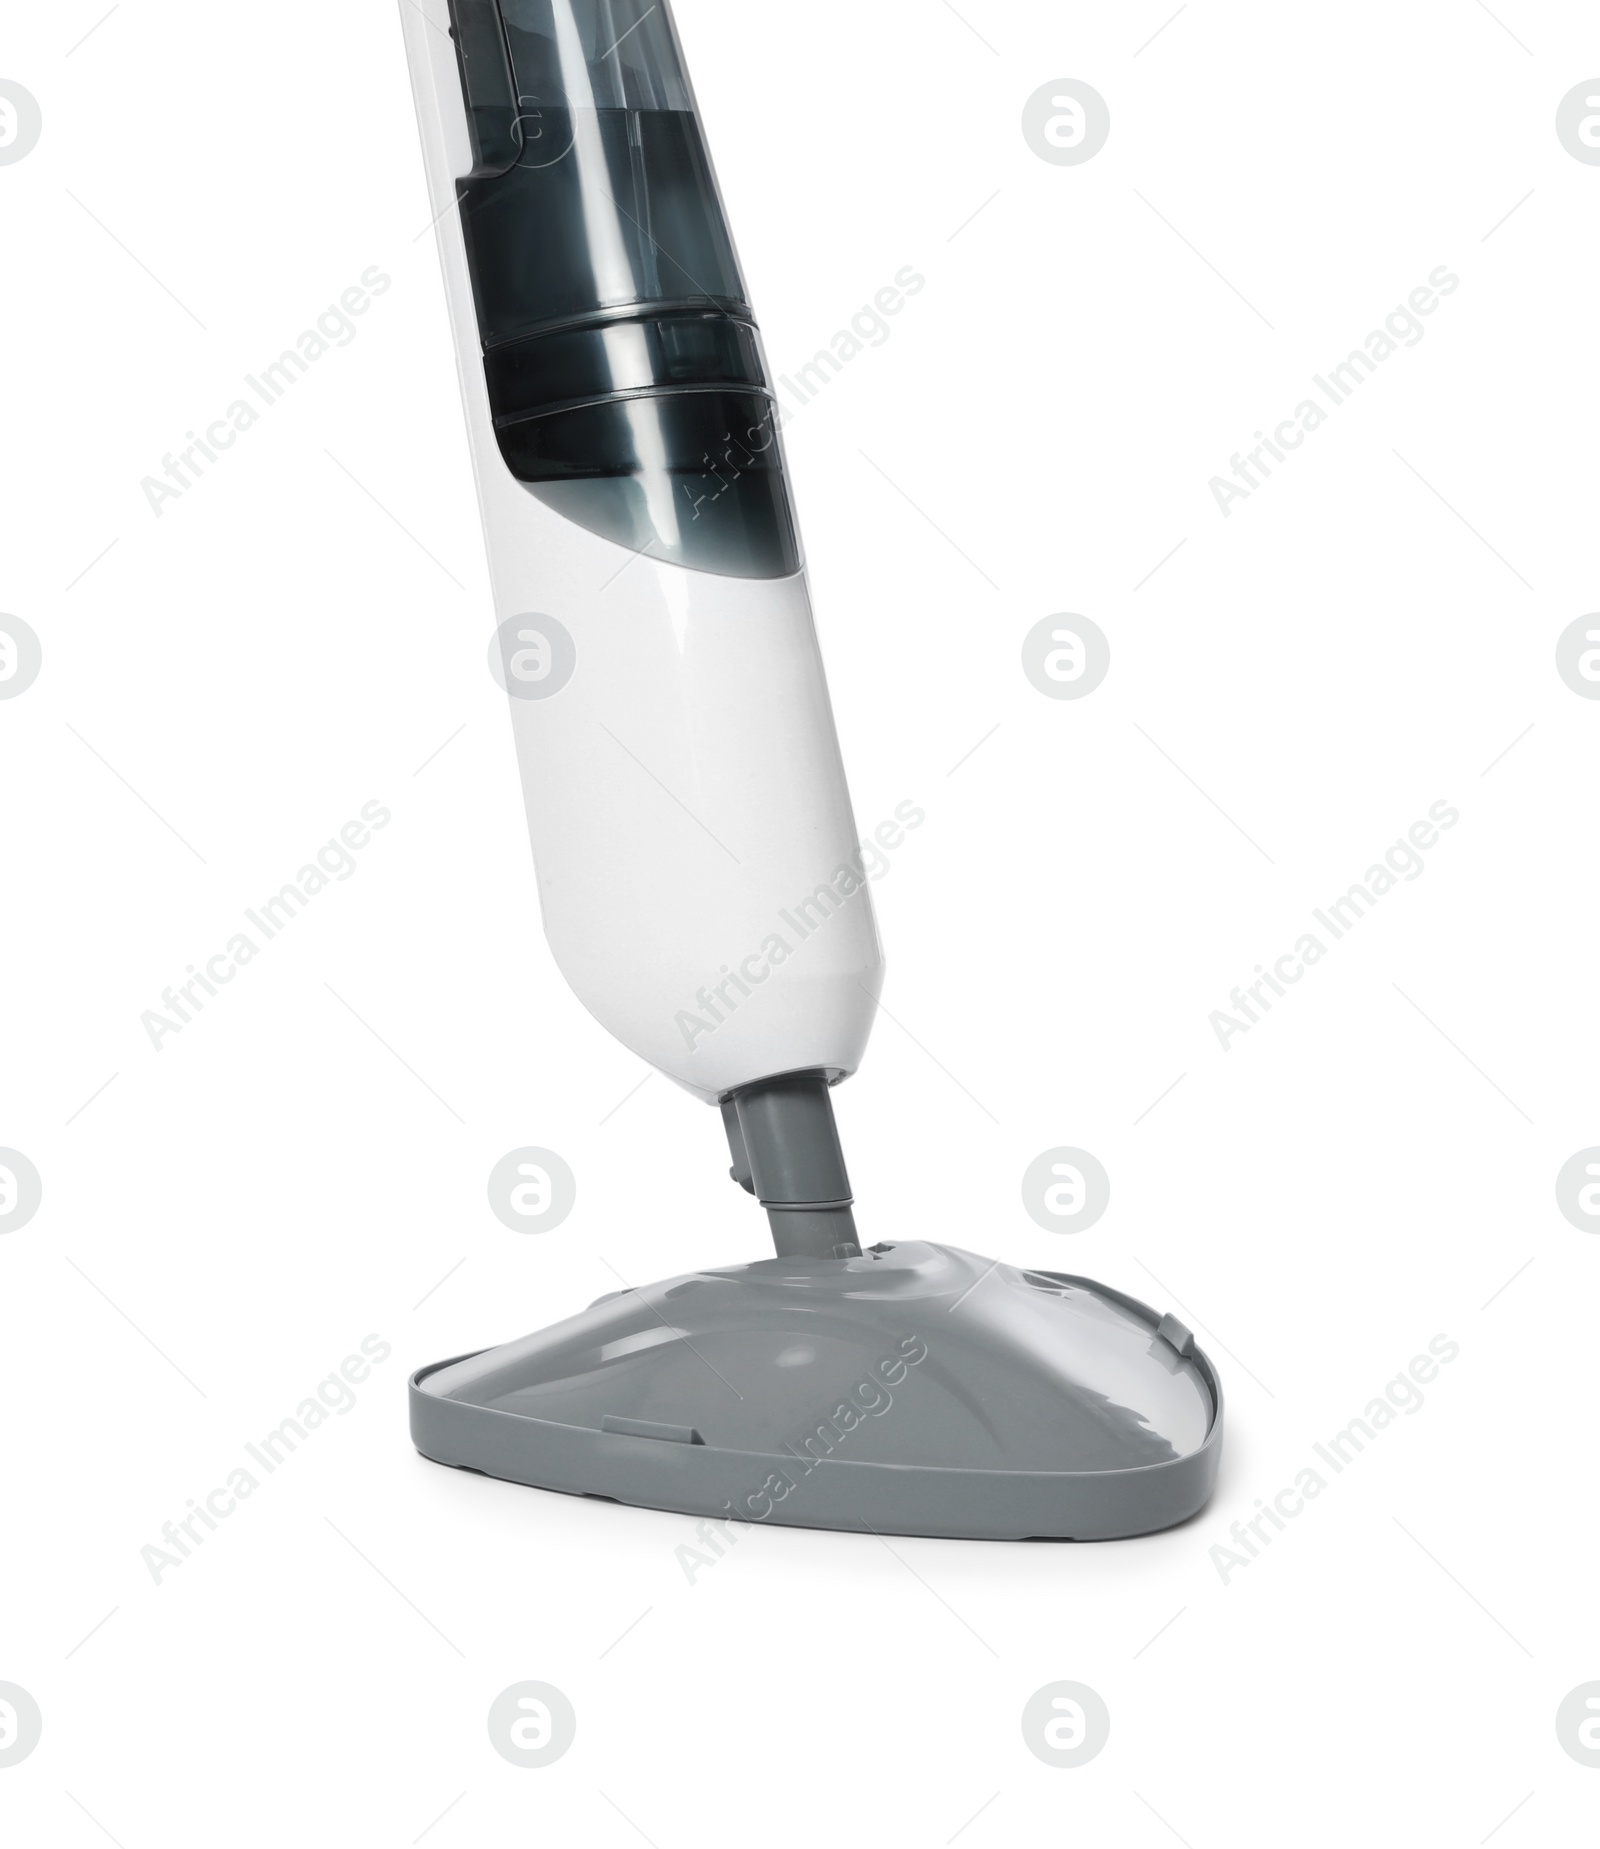 Photo of One modern steam mop isolated on white